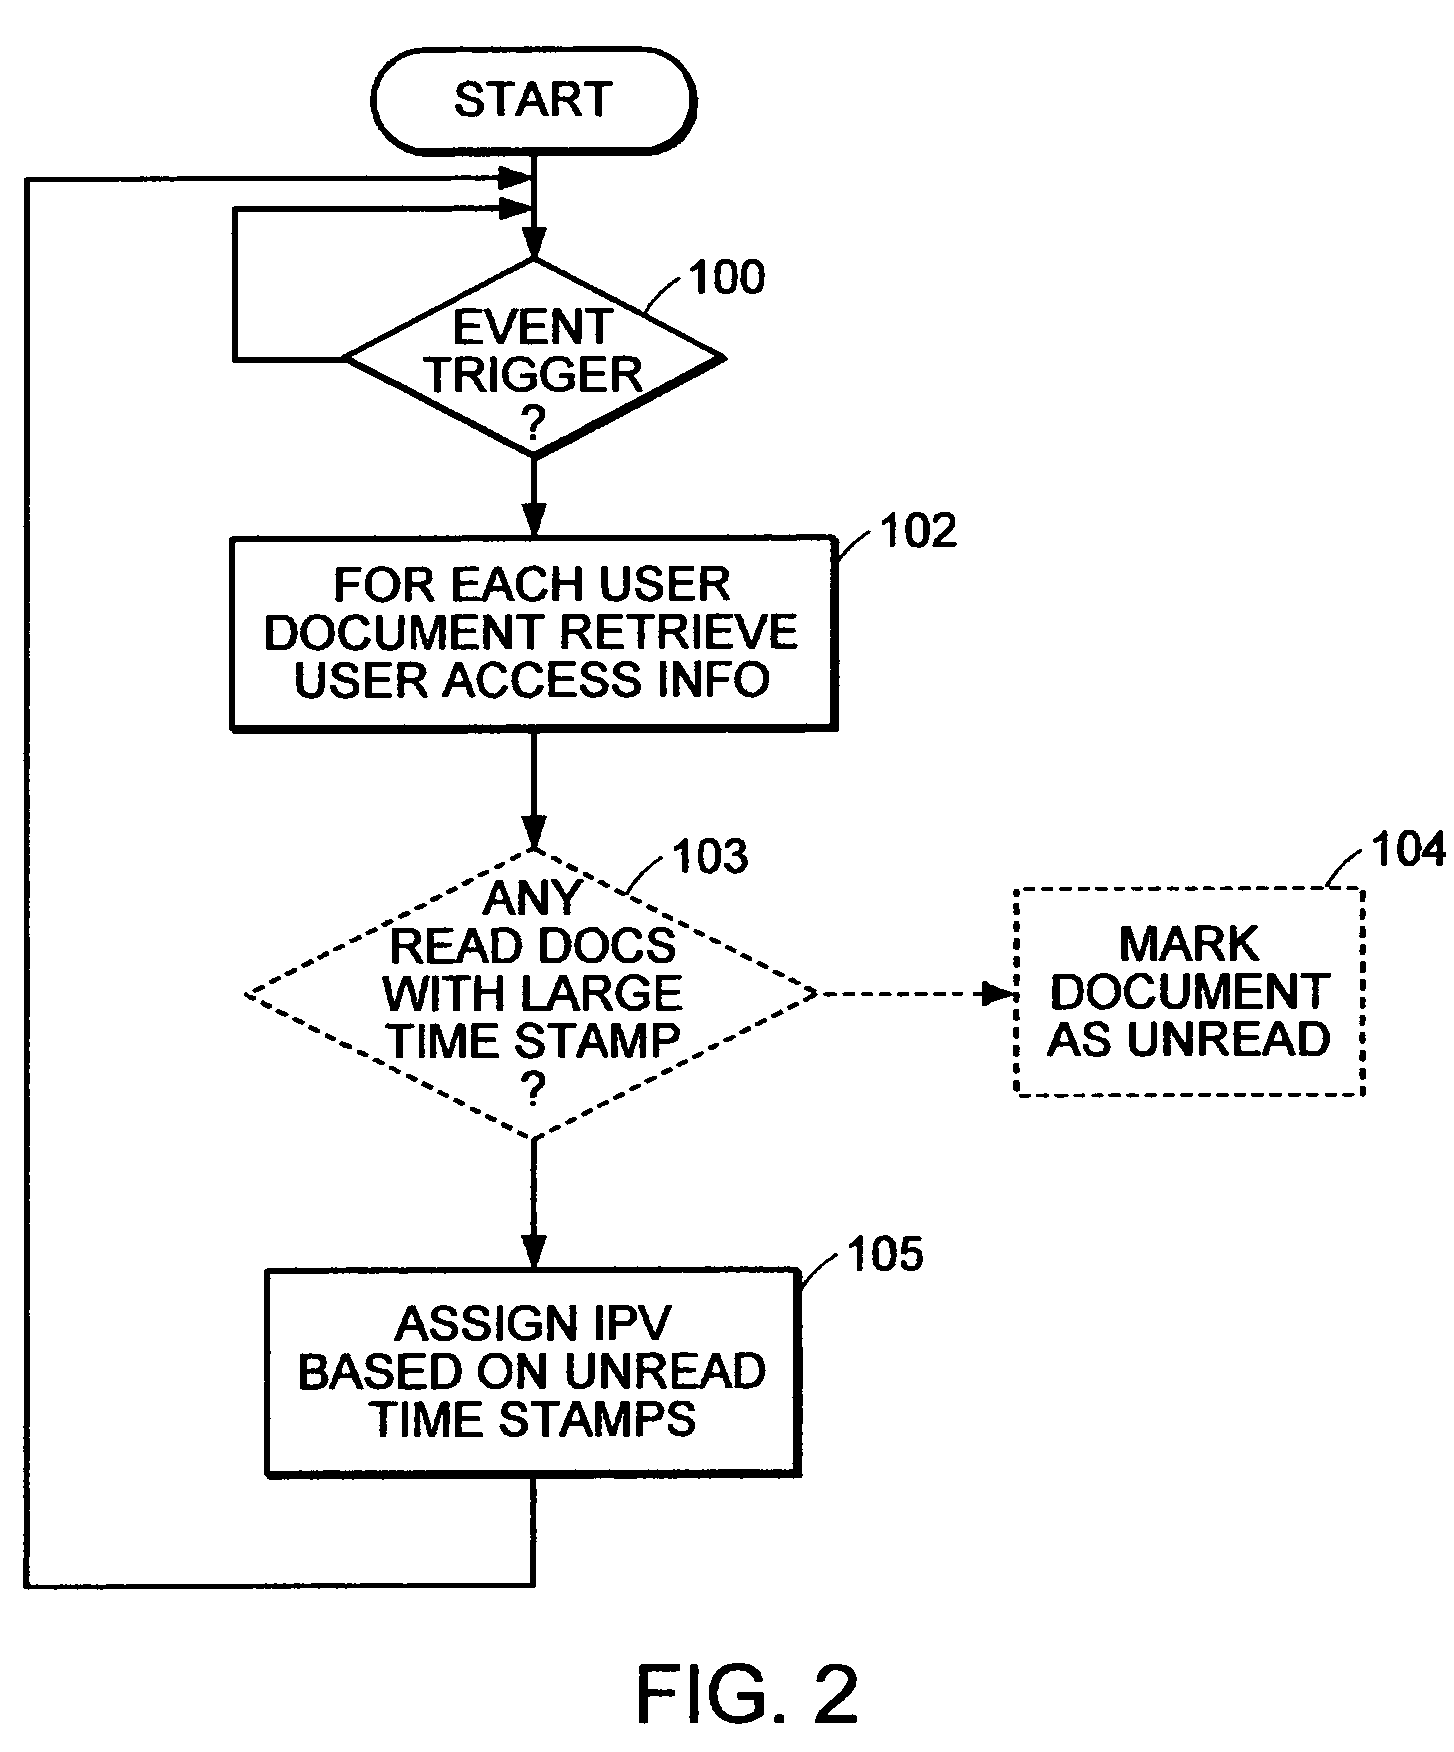 Method for representing an interest priority of an object to a user based on personal histories or social context